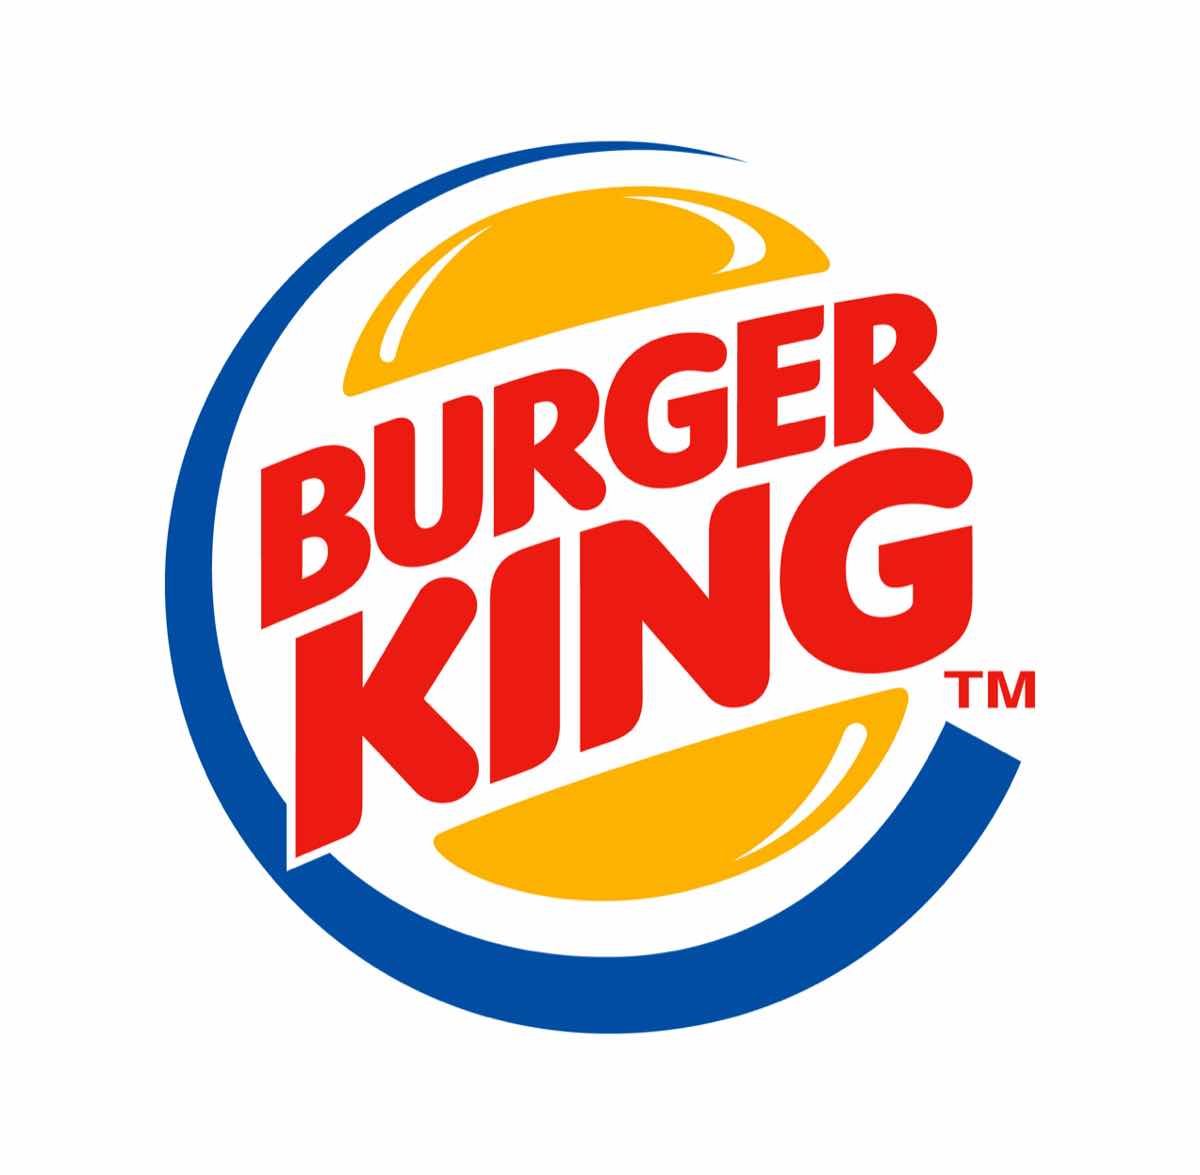 Burger King Q4 and full fiscal 2009 results